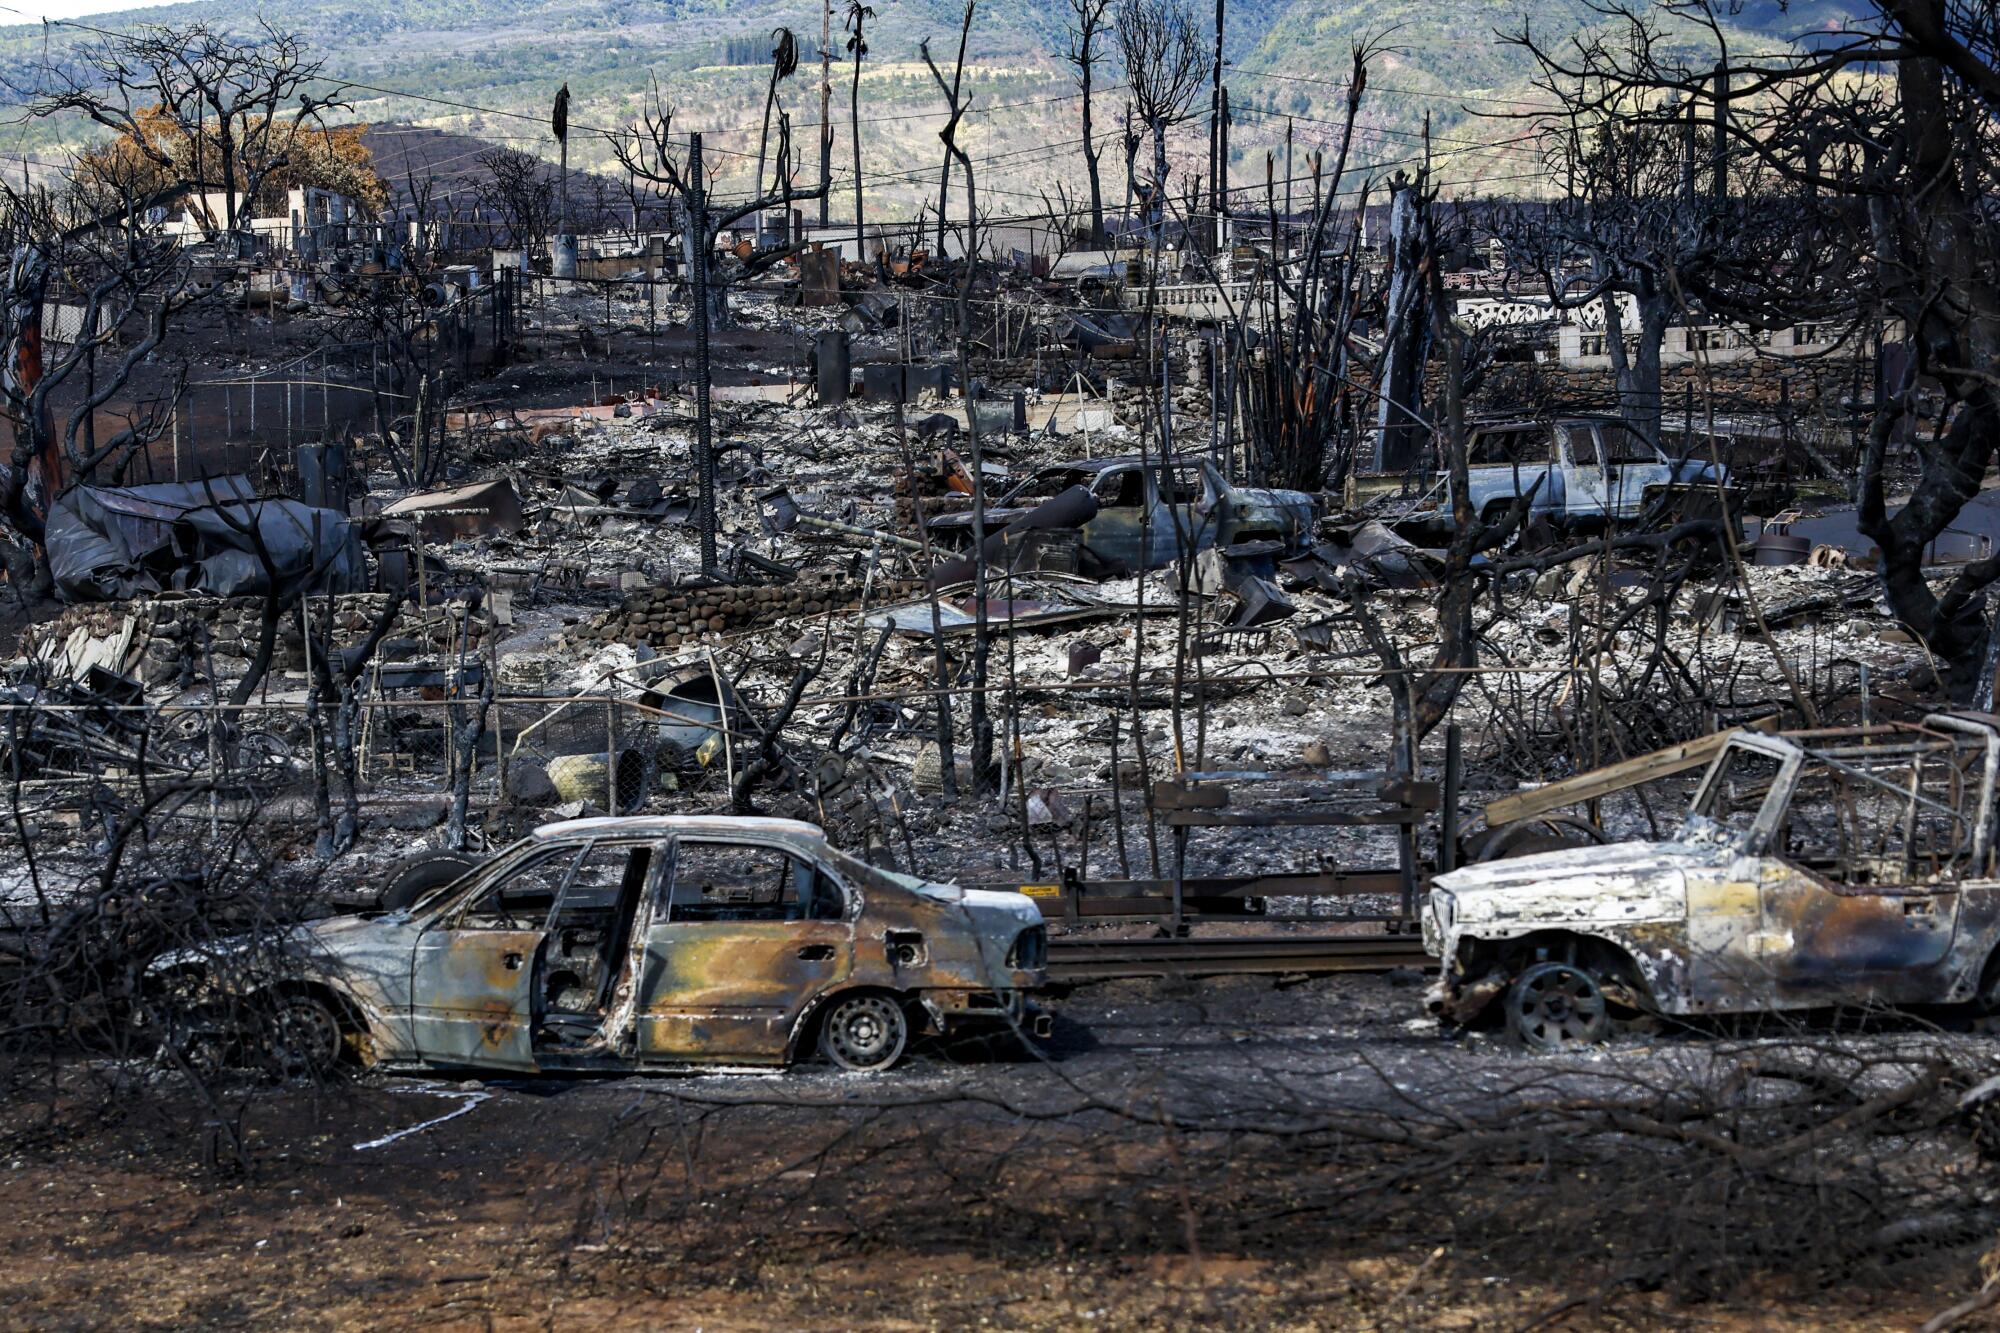 Two burned cars are surrounded by ash and rubble.